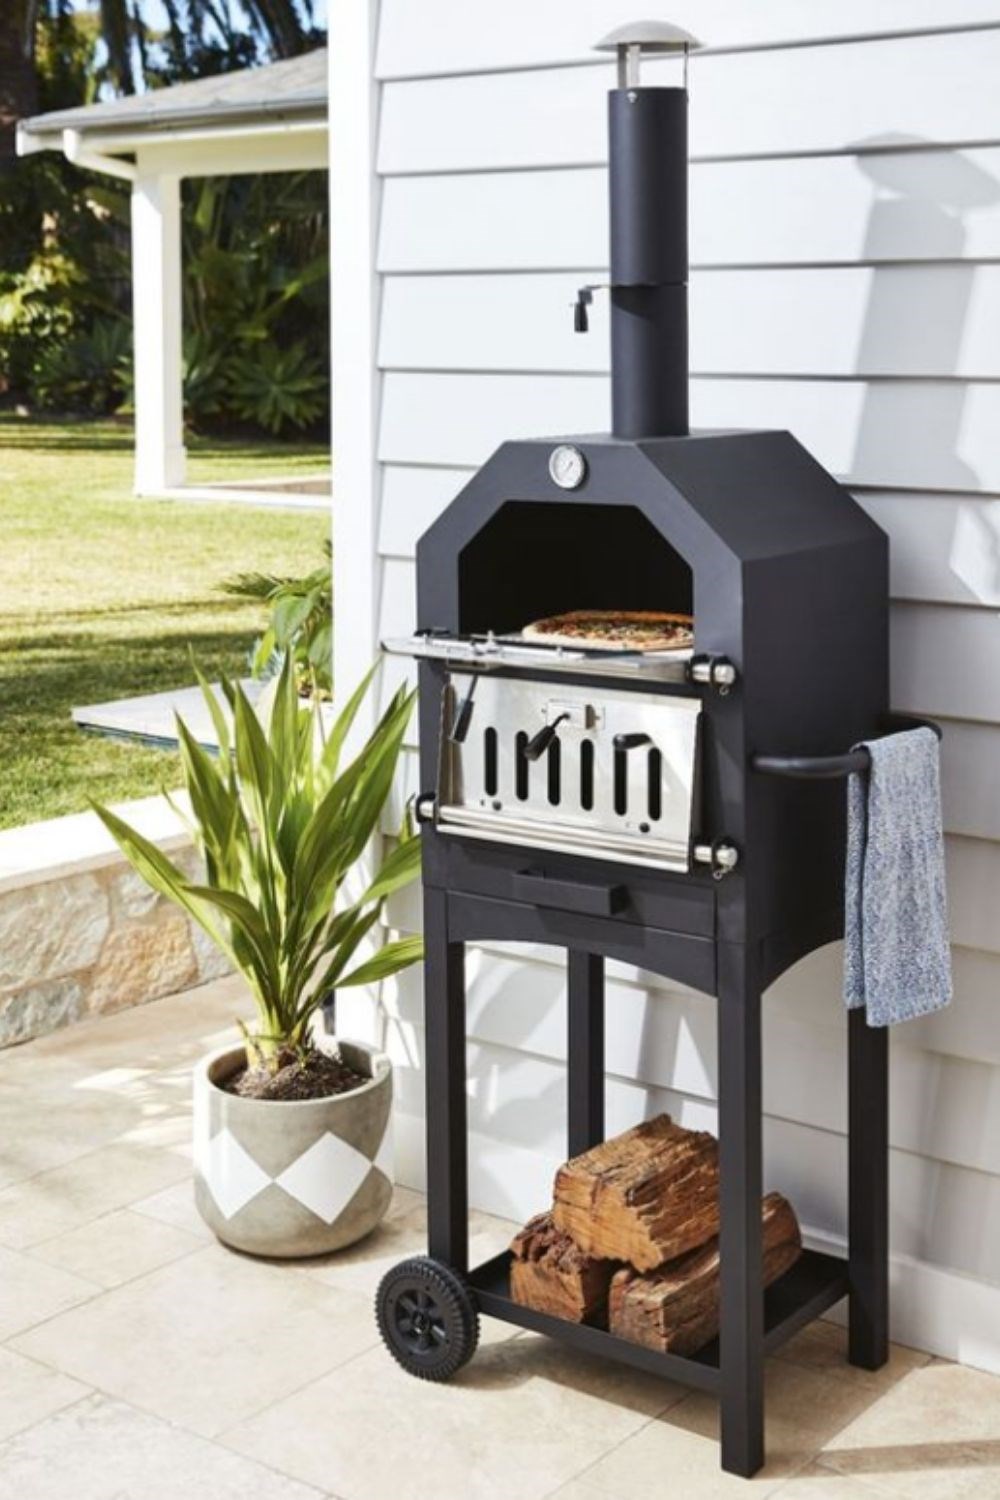 Aldi is selling a woodfire pizza oven for only $179 | Better Homes and